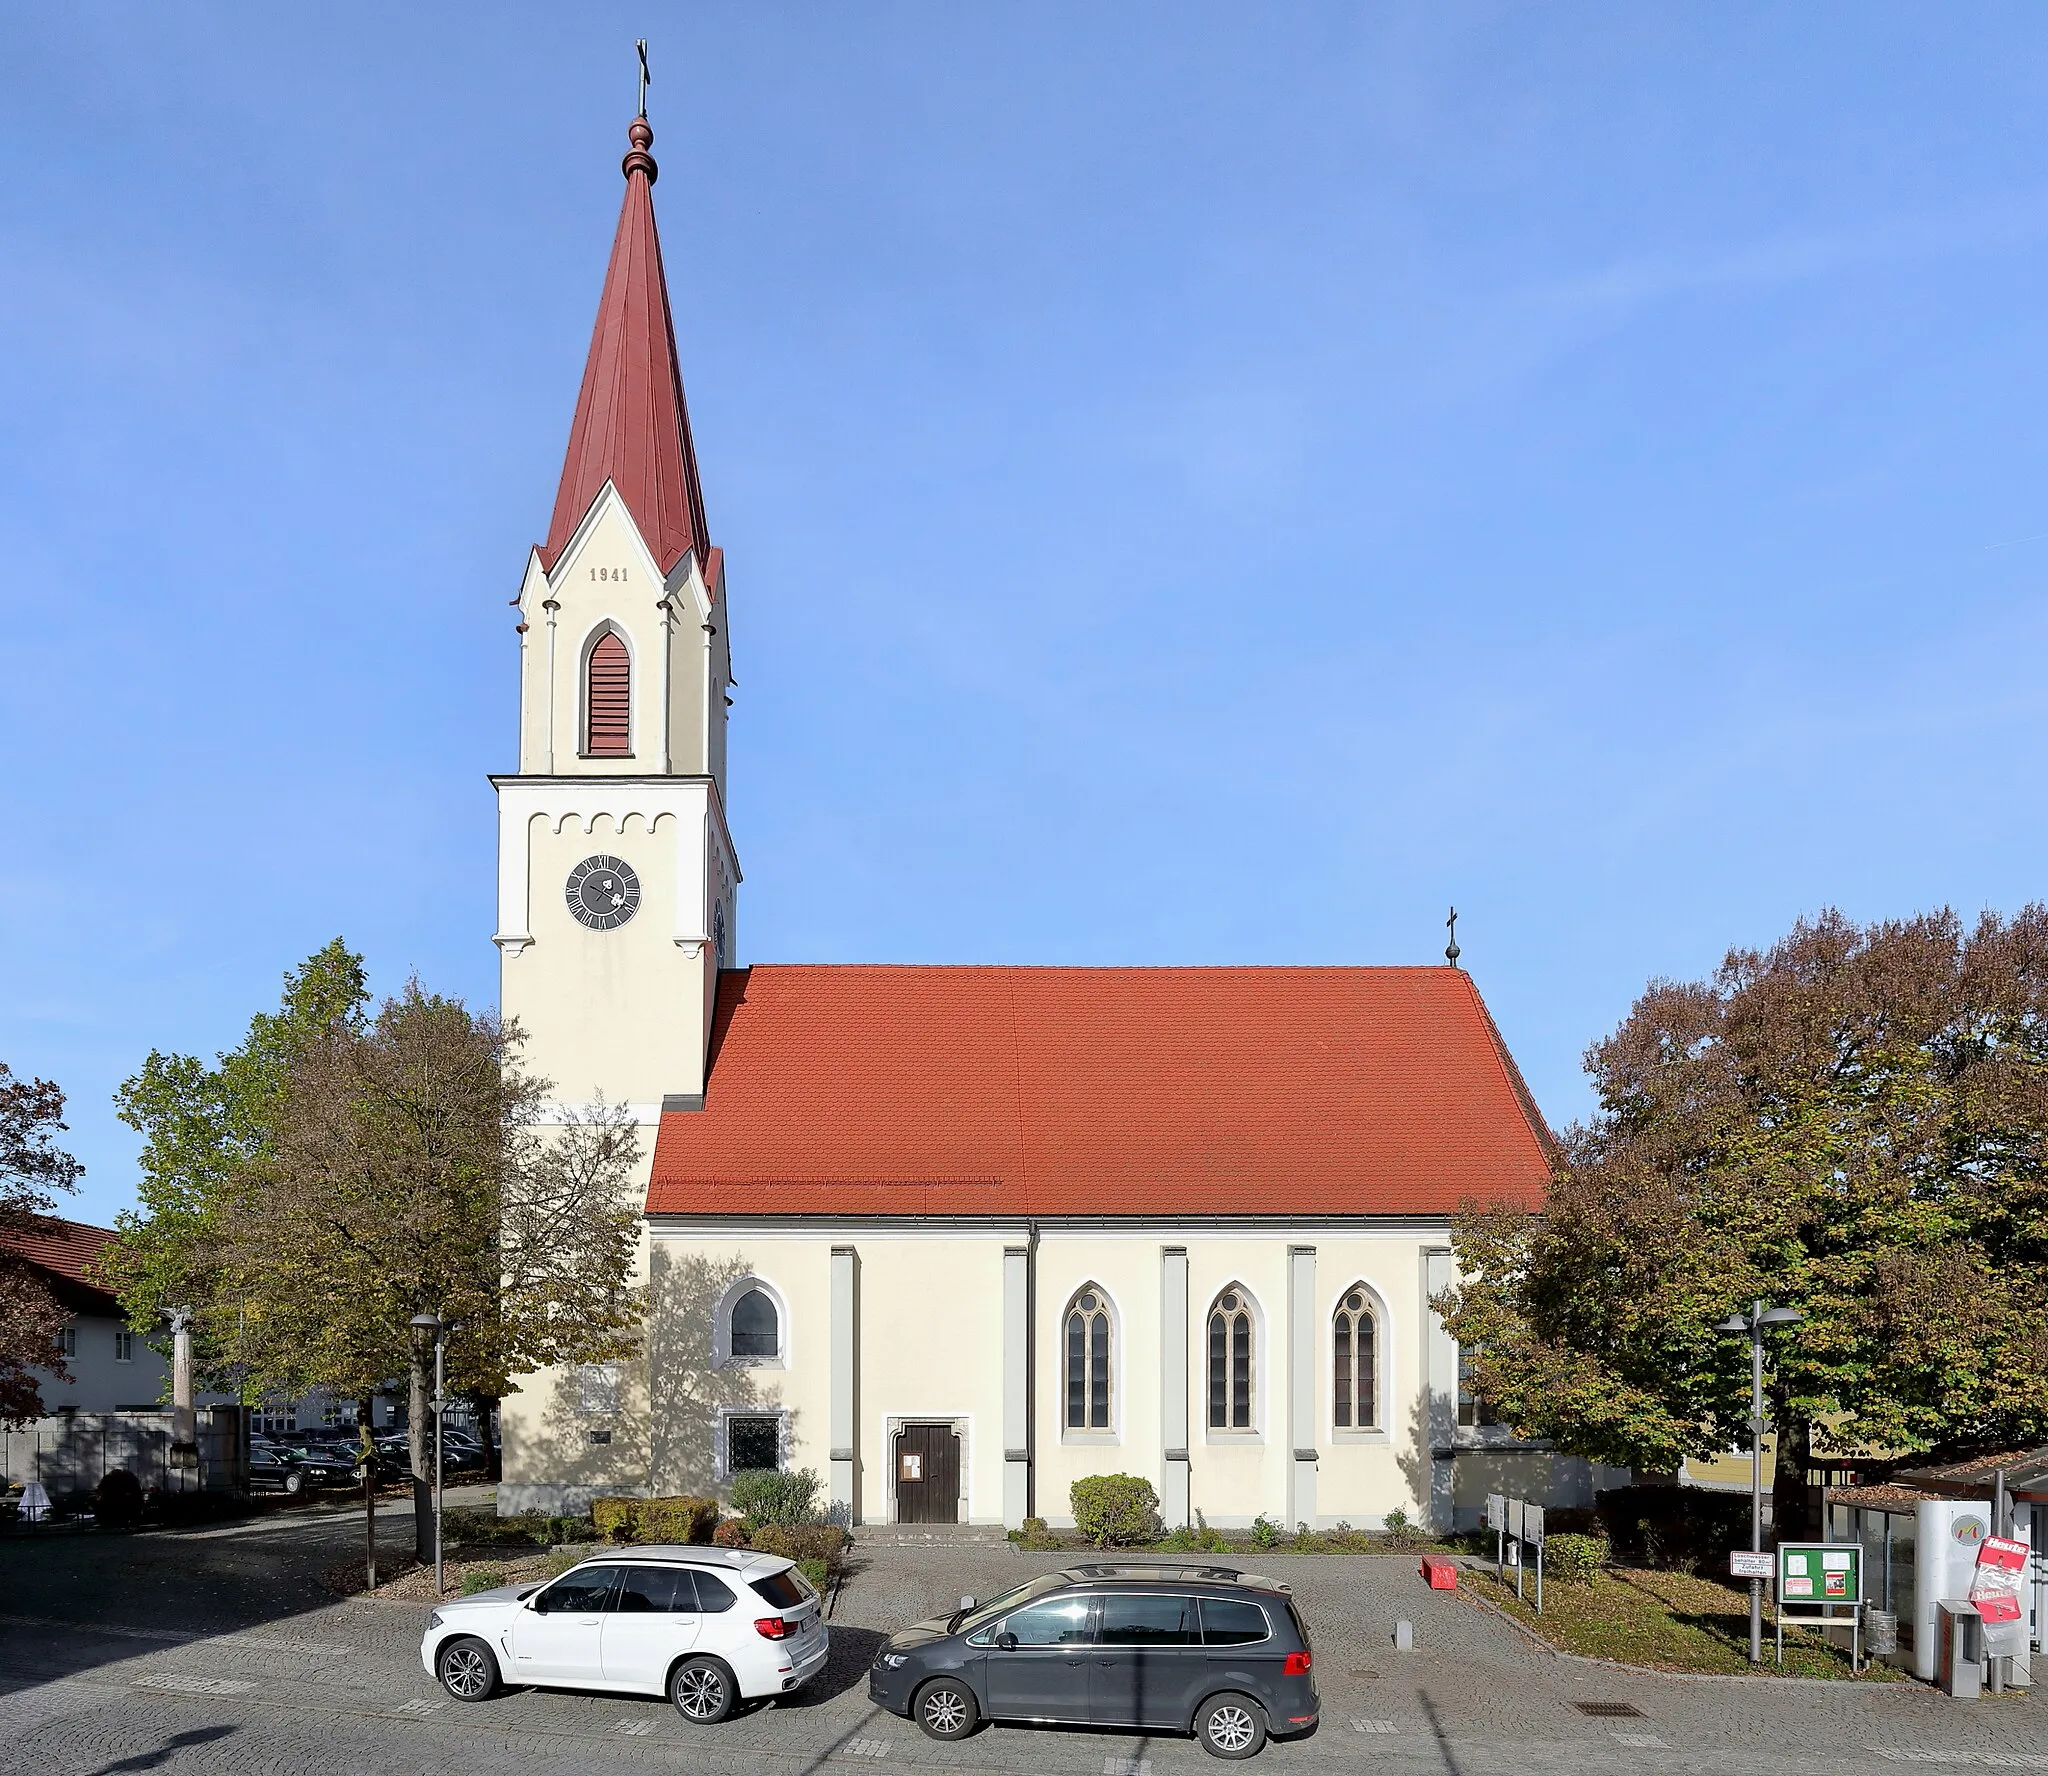 Image of Marchtrenk